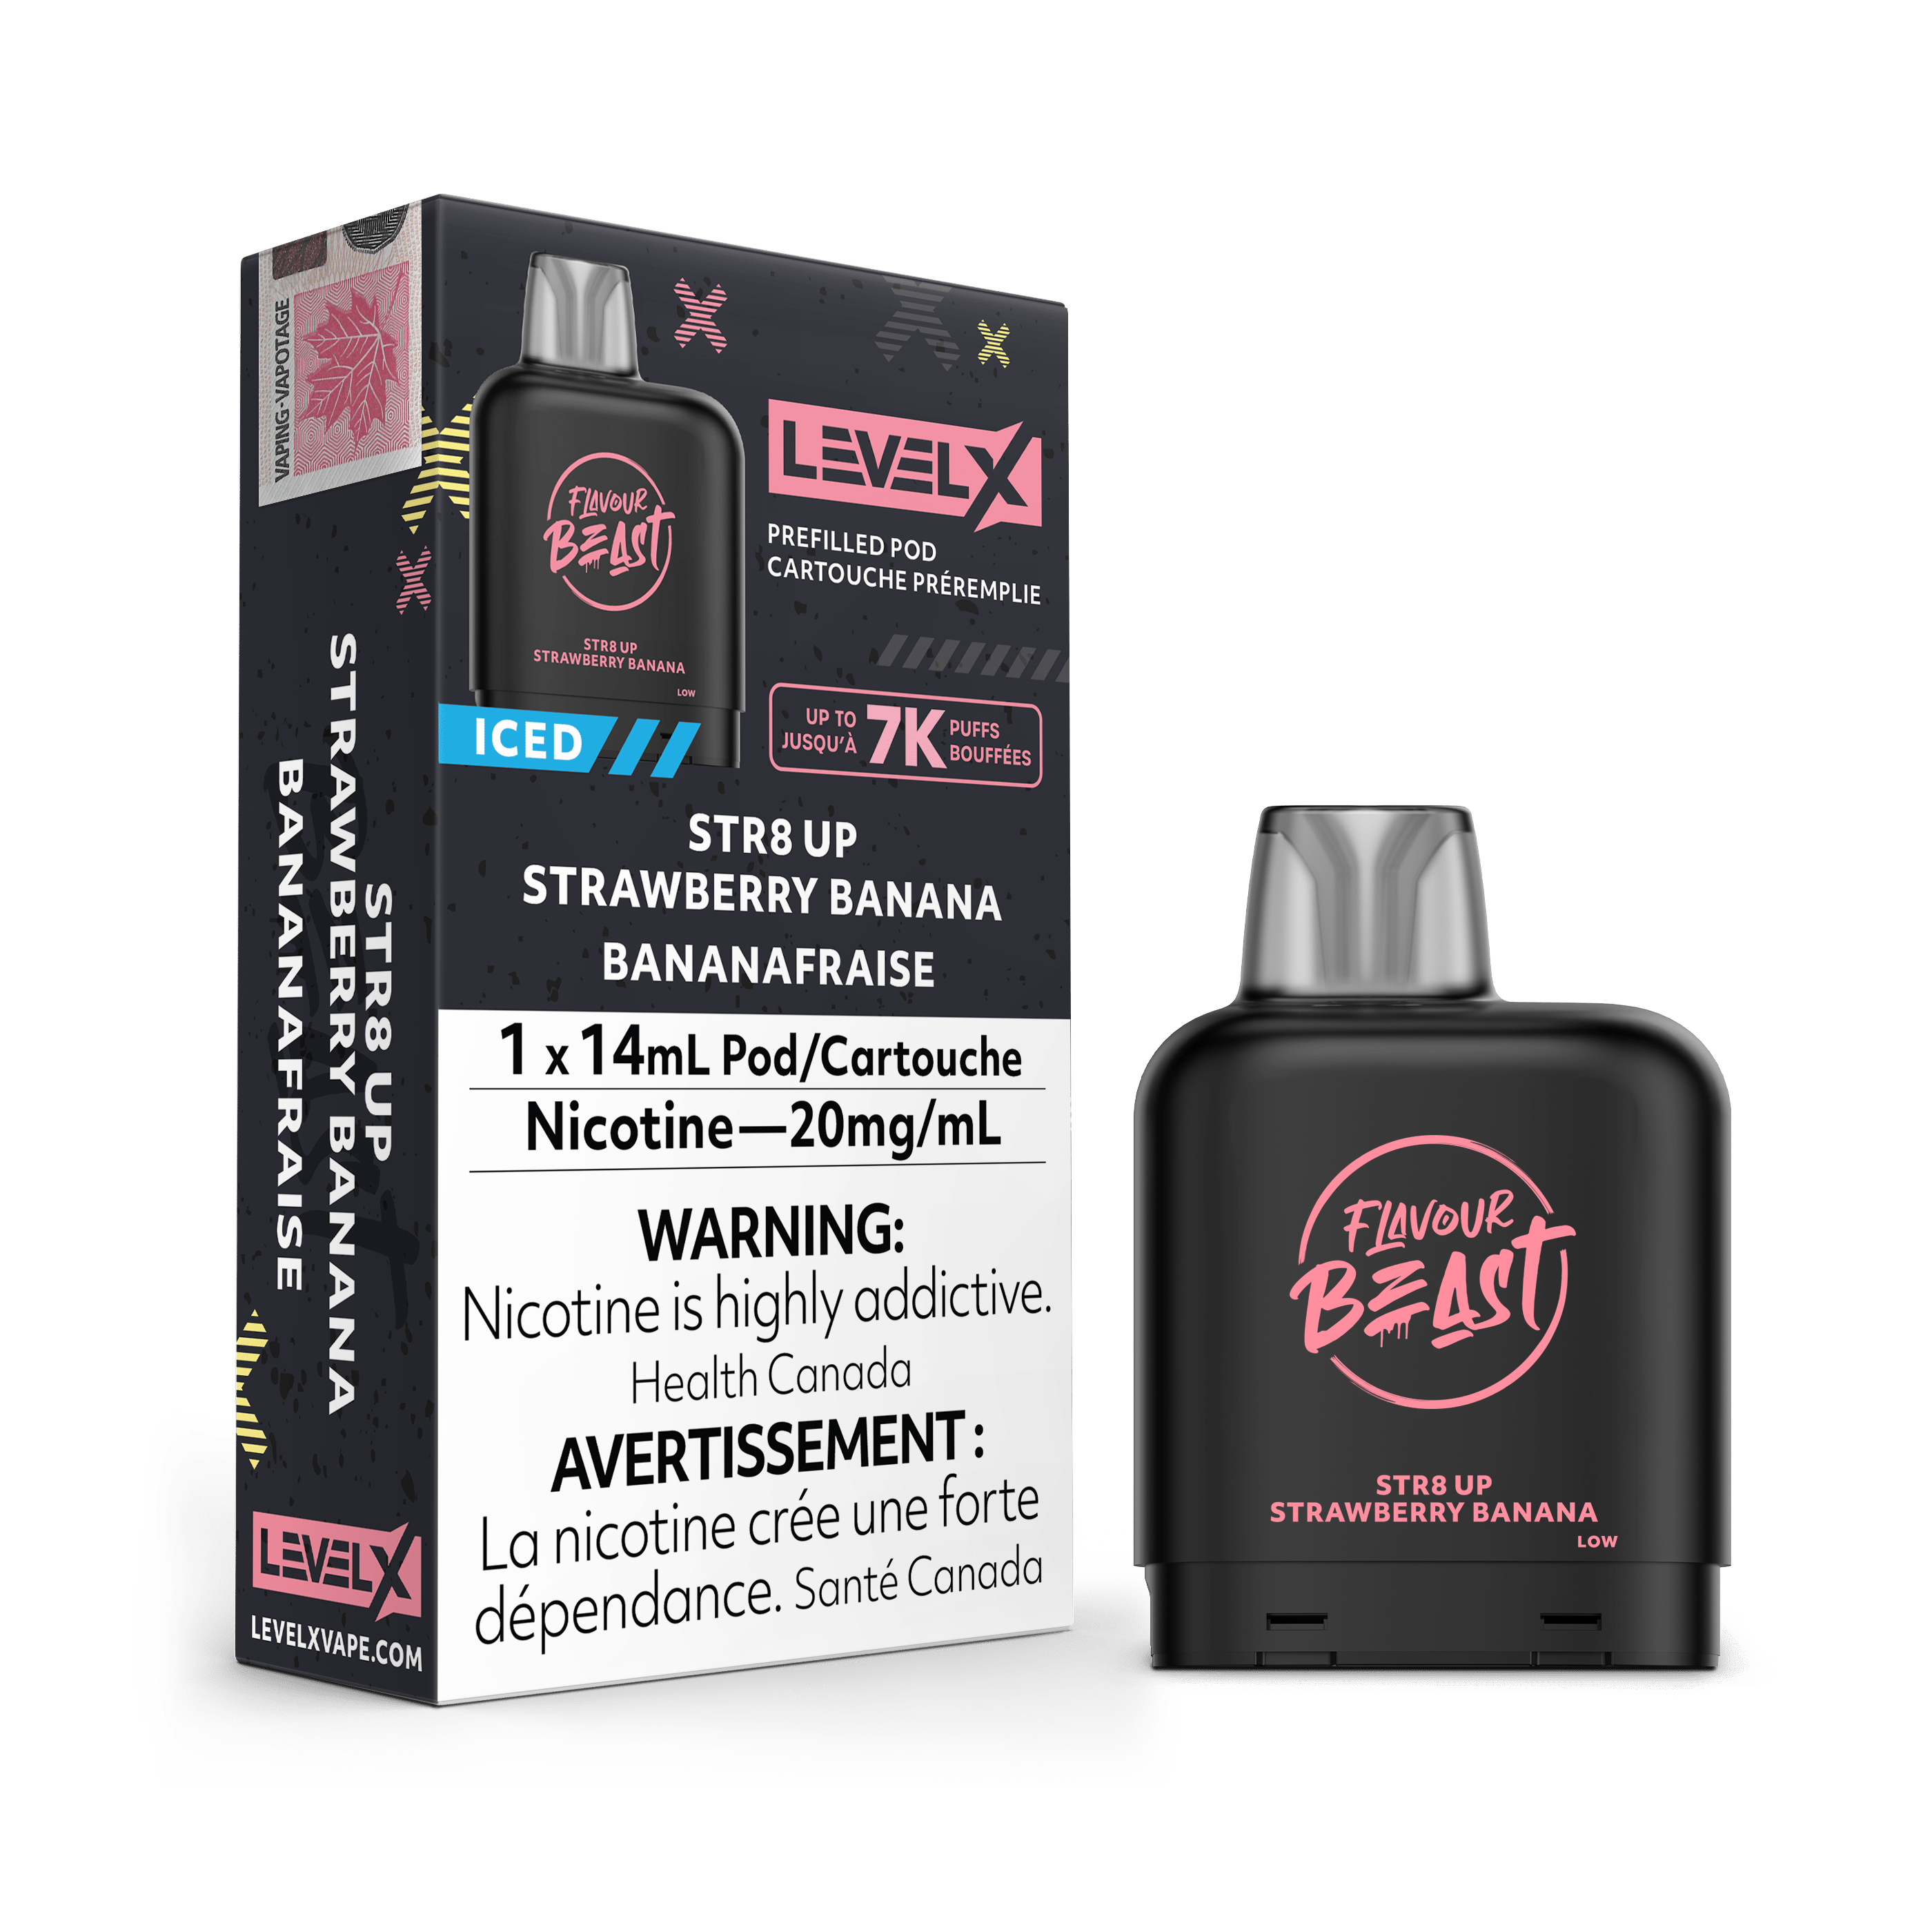 Flavour Beast Level X Pod - Str8 Up Strawberry Banana Iced available on Canada online vape shop